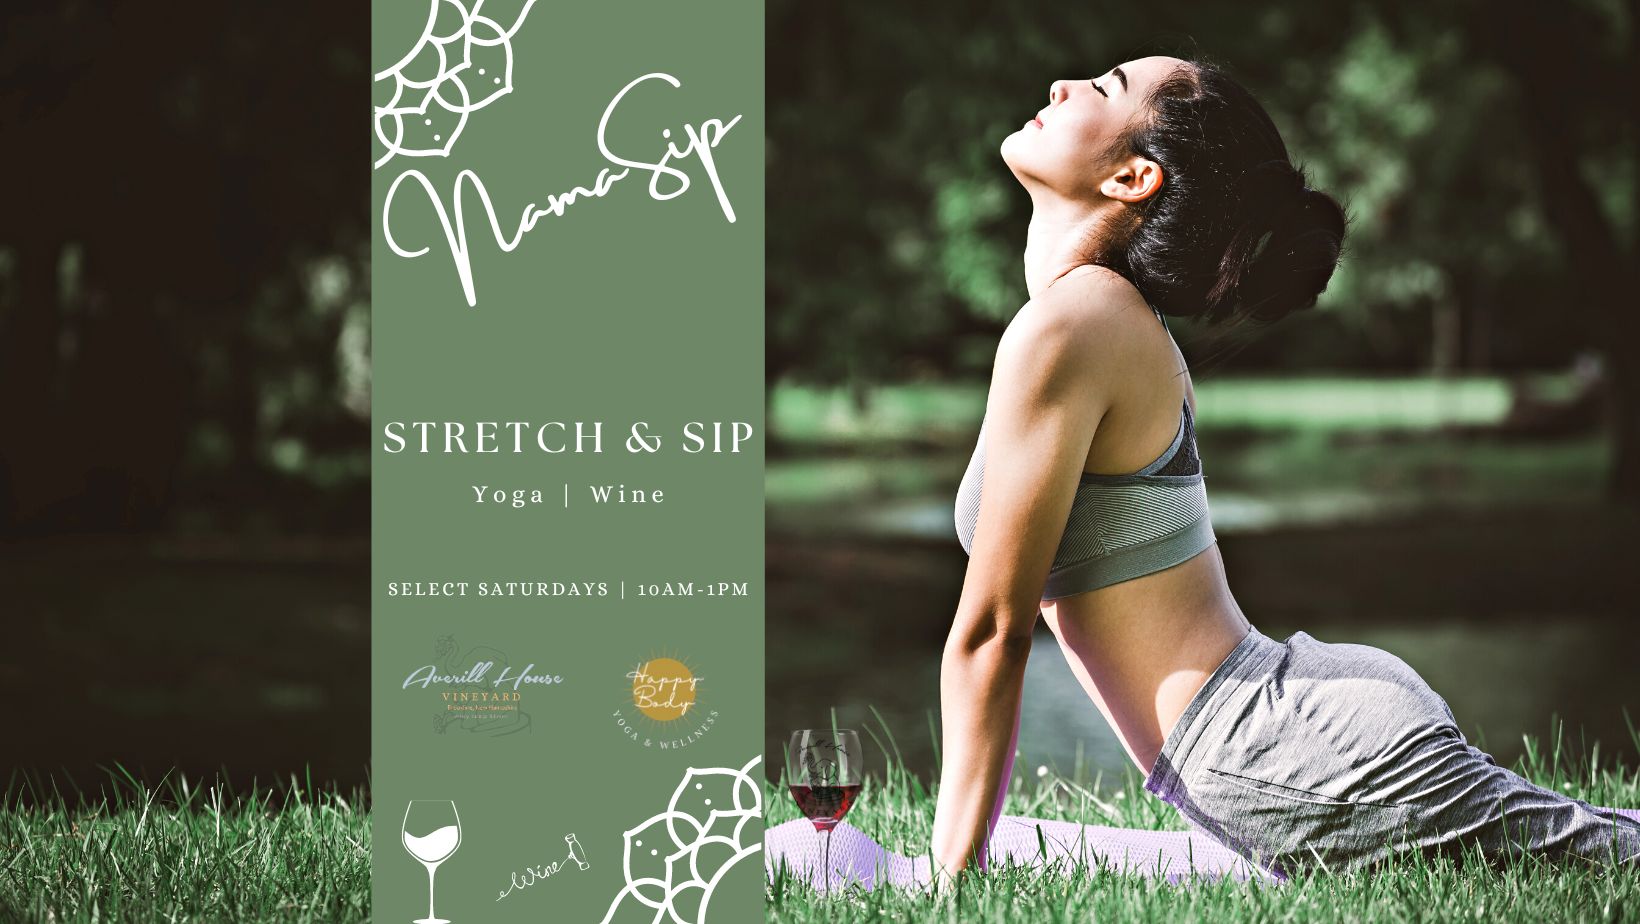 Stretch and Sip Yoga with Happy Body Yoga at Averill House Vineyard select Saturdays· Brookline, NH, Brookline, New Hampshire, United States